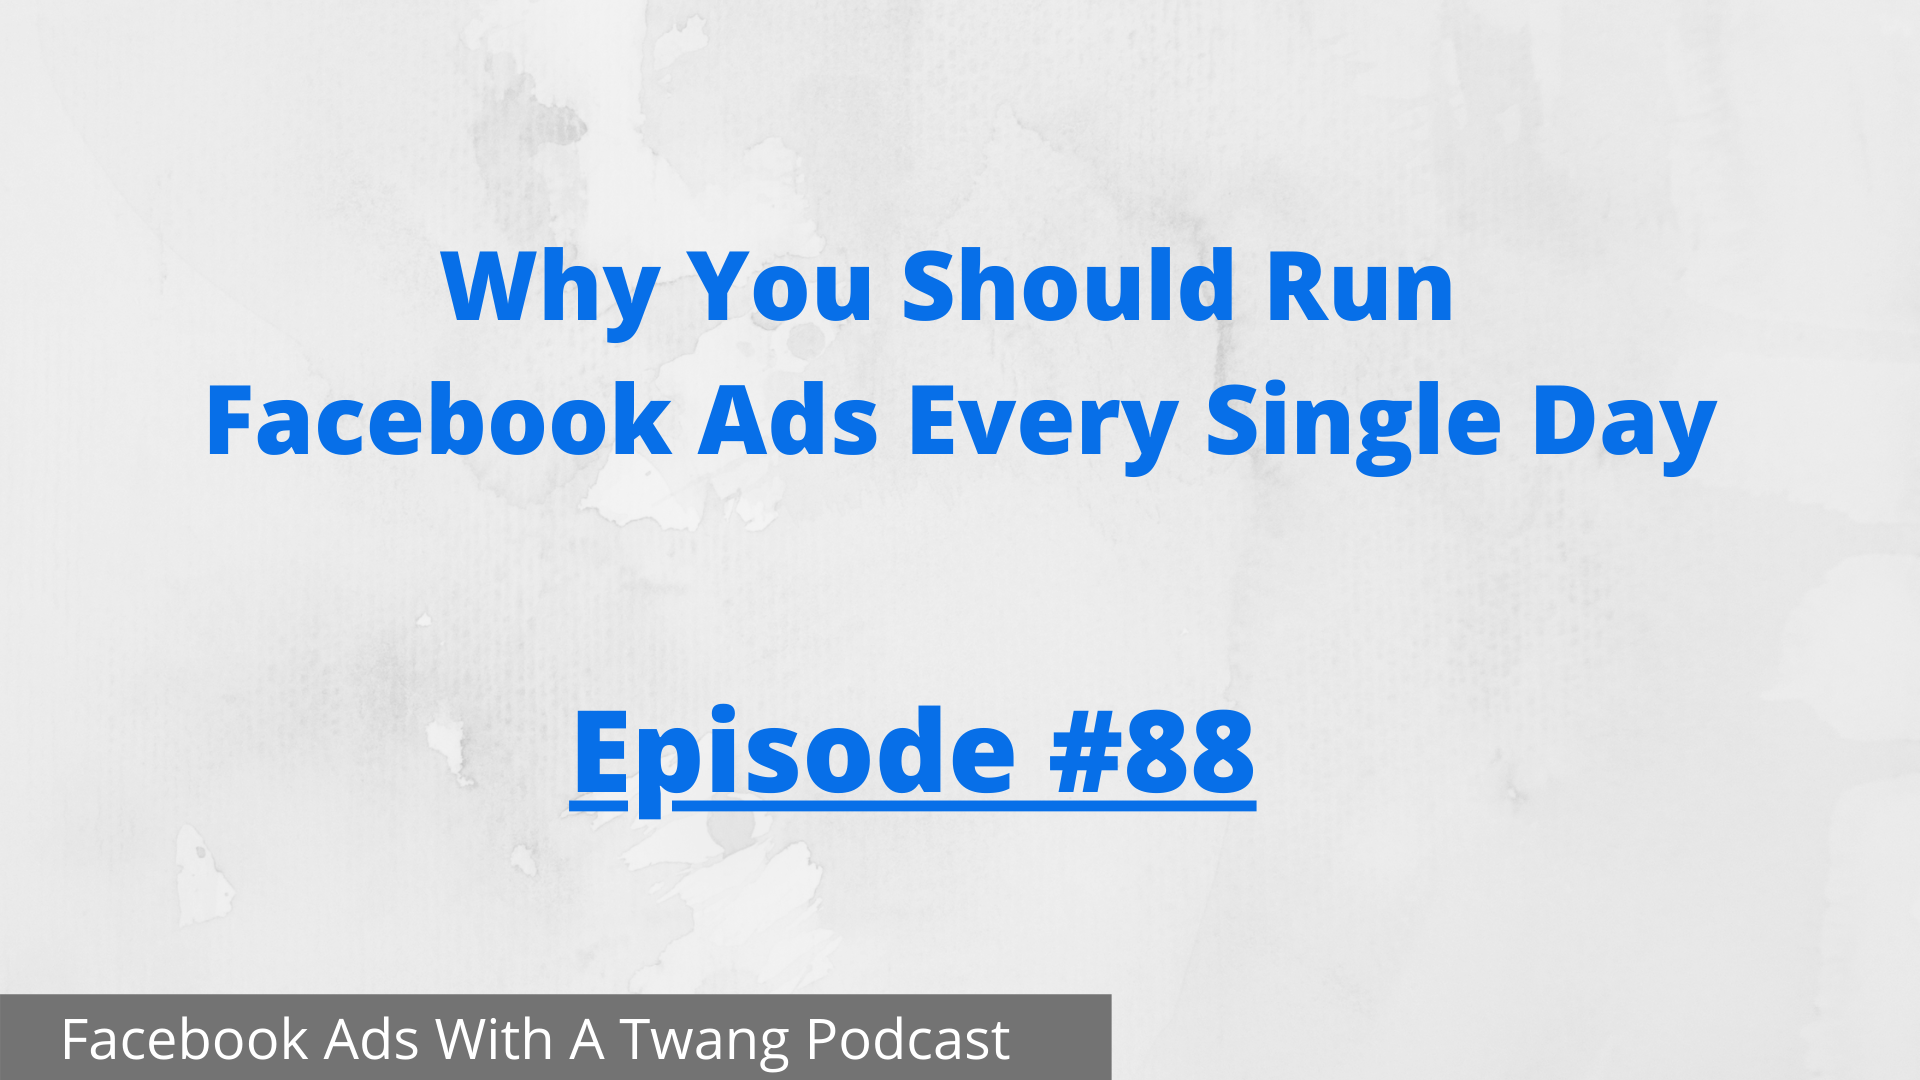 Why you should run Facebook ads every single day